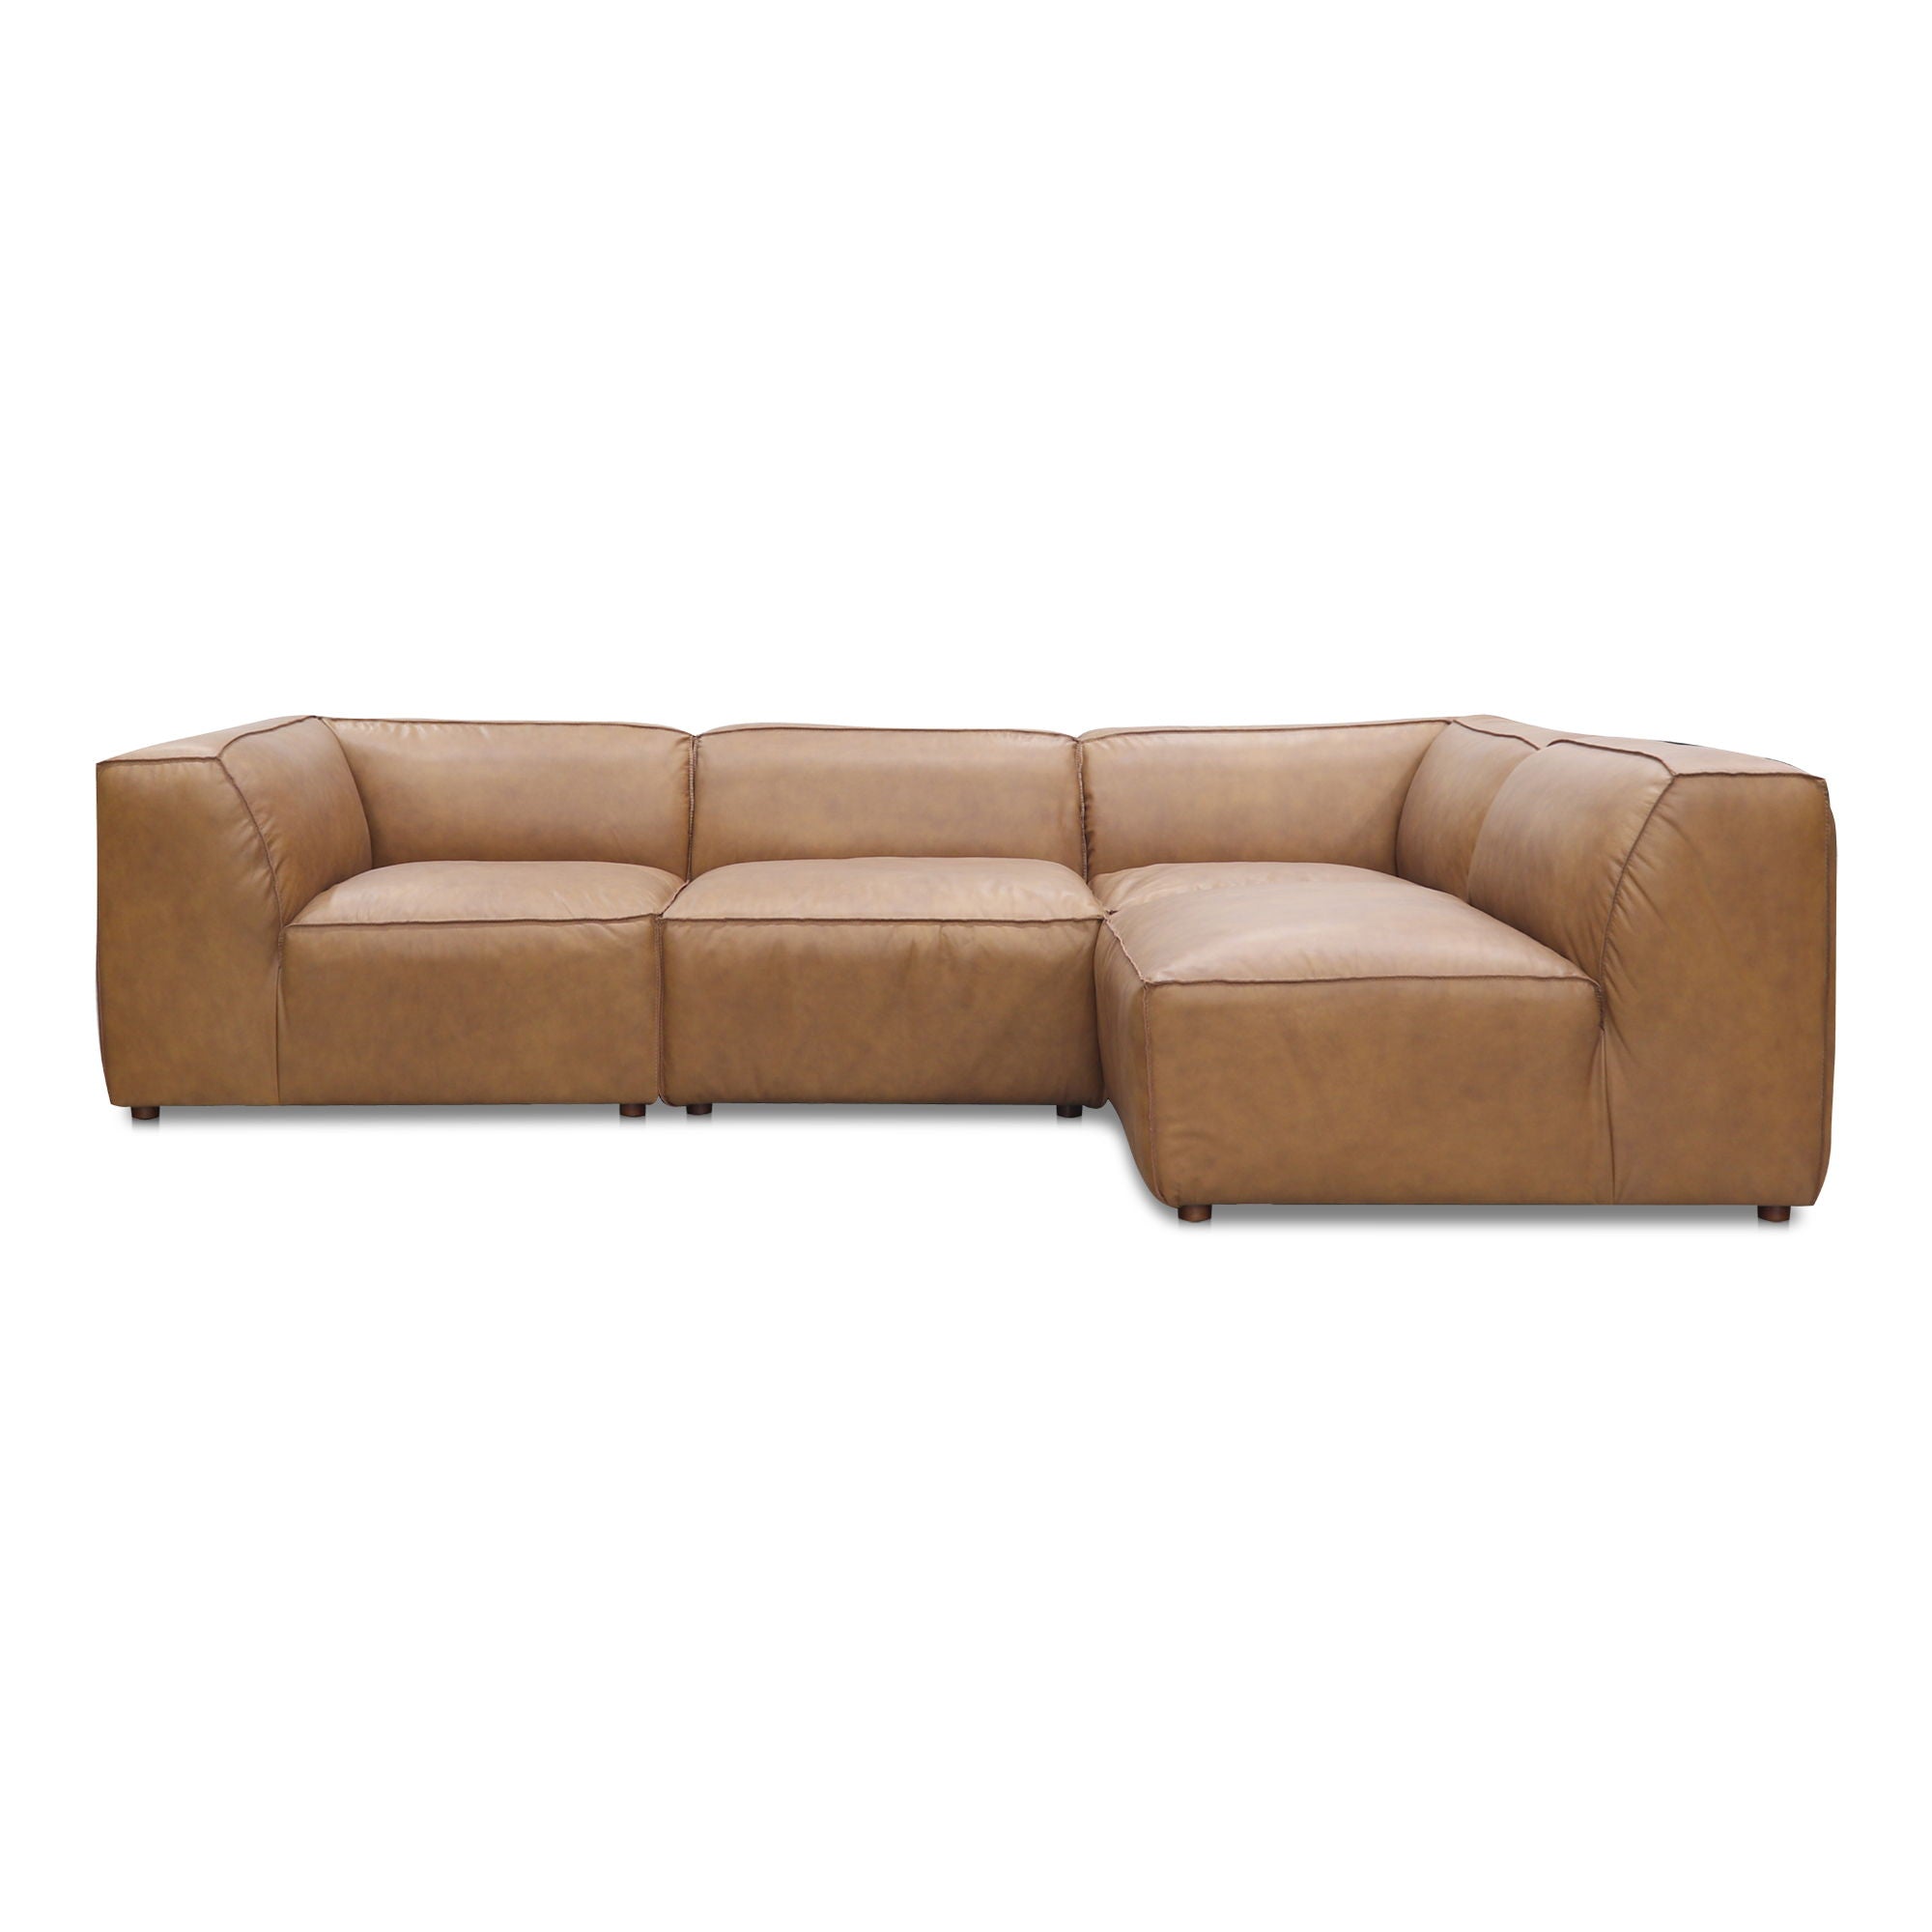 Tan Leather Modular Sectional - Form Signature, Comfy-Stationary Sectionals-American Furniture Outlet